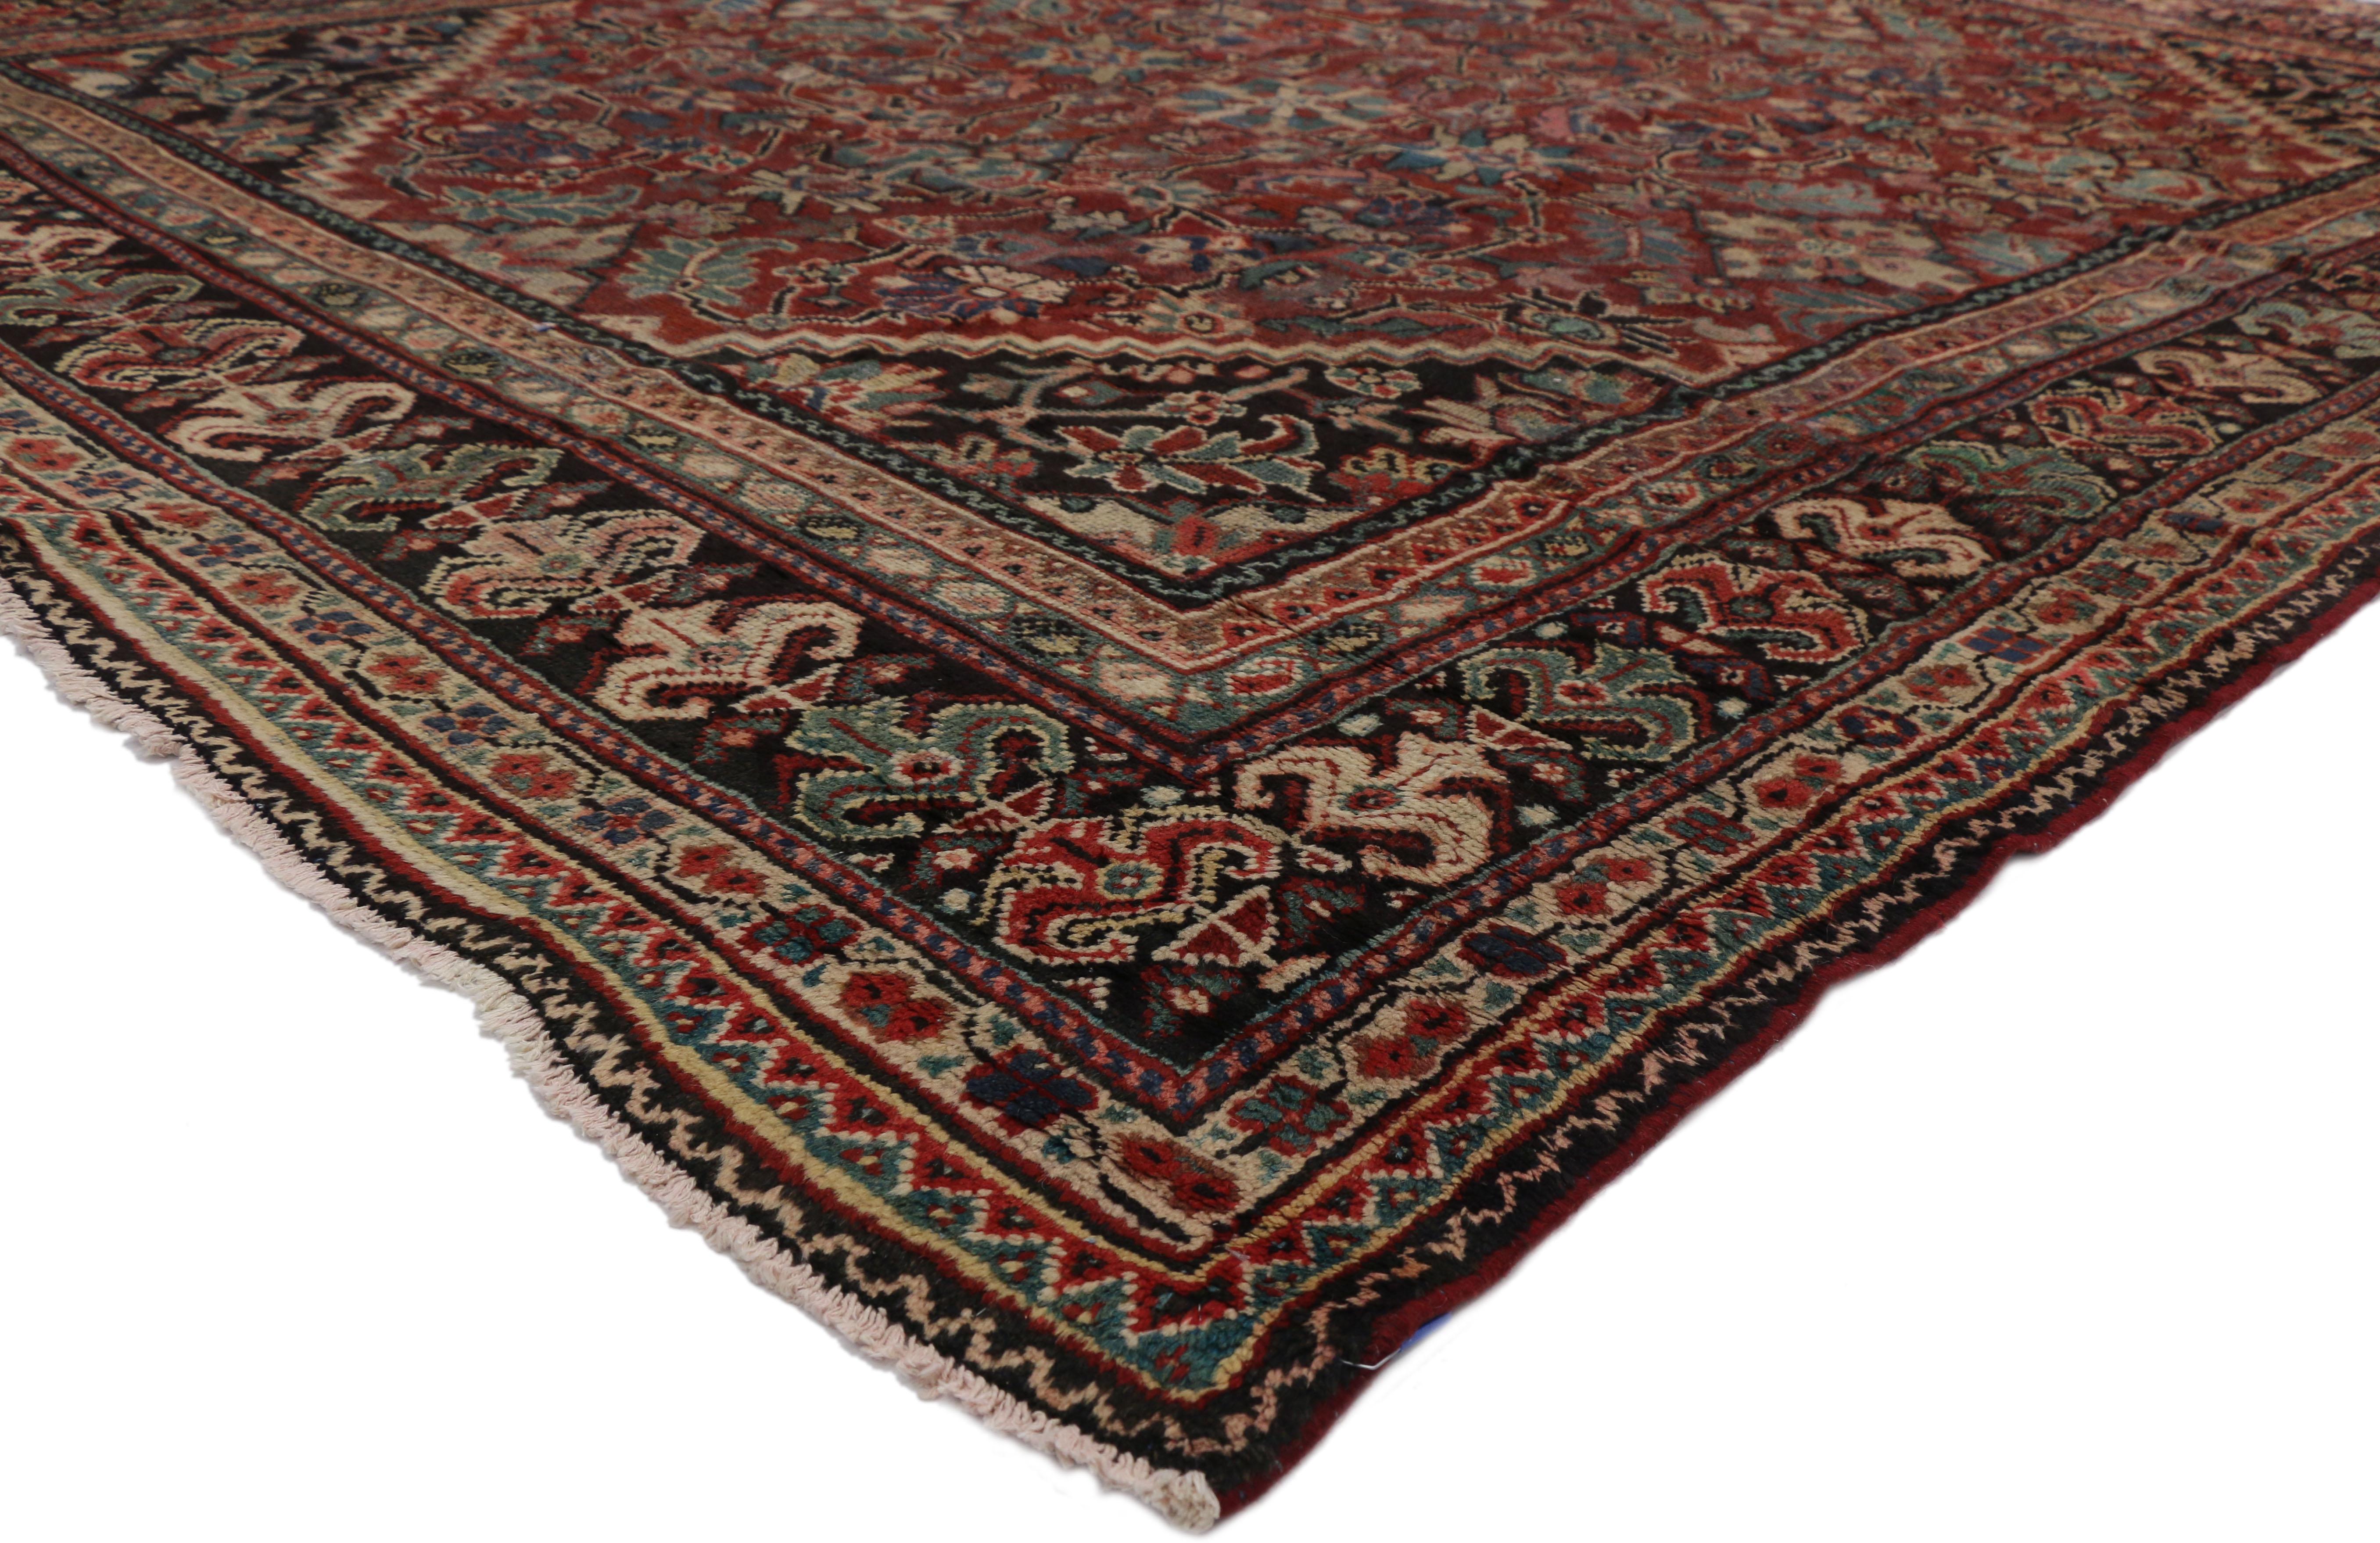 76251 Vintage Persian Mahal Rug with Rustic English Traditional Style 09'09 X 12'00. Warm and inviting, this hand-knotted wool vintage Persian Mahal rug features an all-over geometric floral and palmette pattern. It is enclosed by contrasting